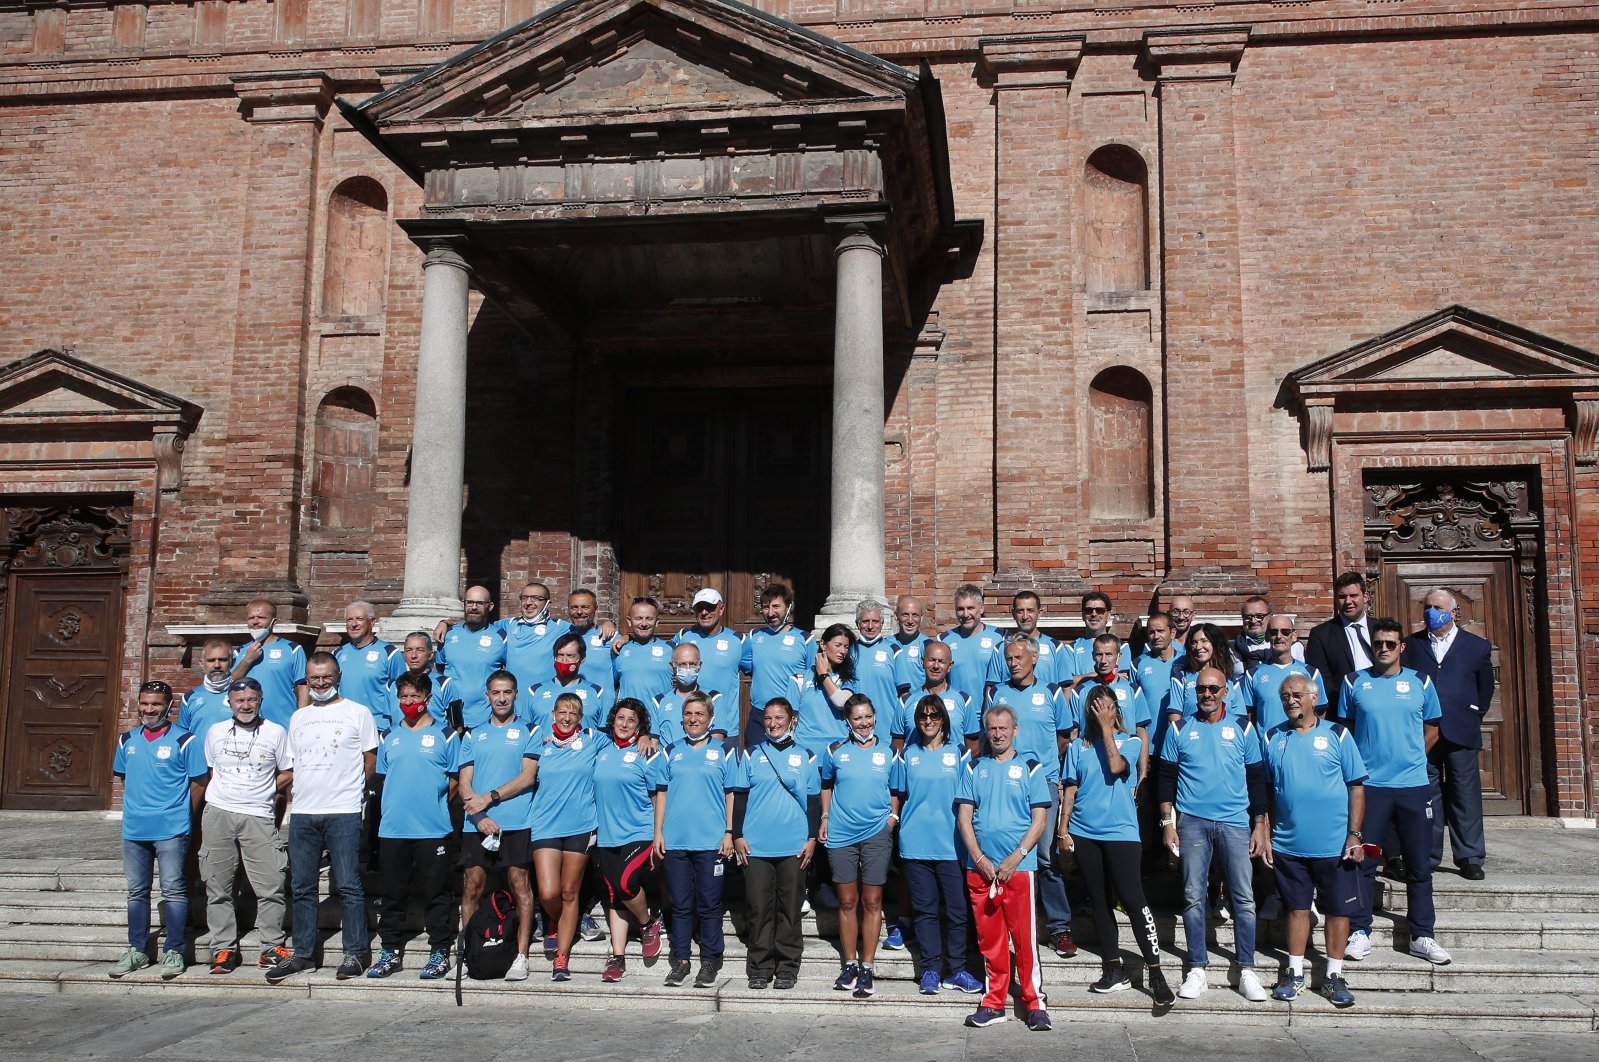 Runners pose prior to the start of a 180-kilometer relay race, in Codogno, Italy, Saturday, Sept. 26, 2020.  (AP Photo)